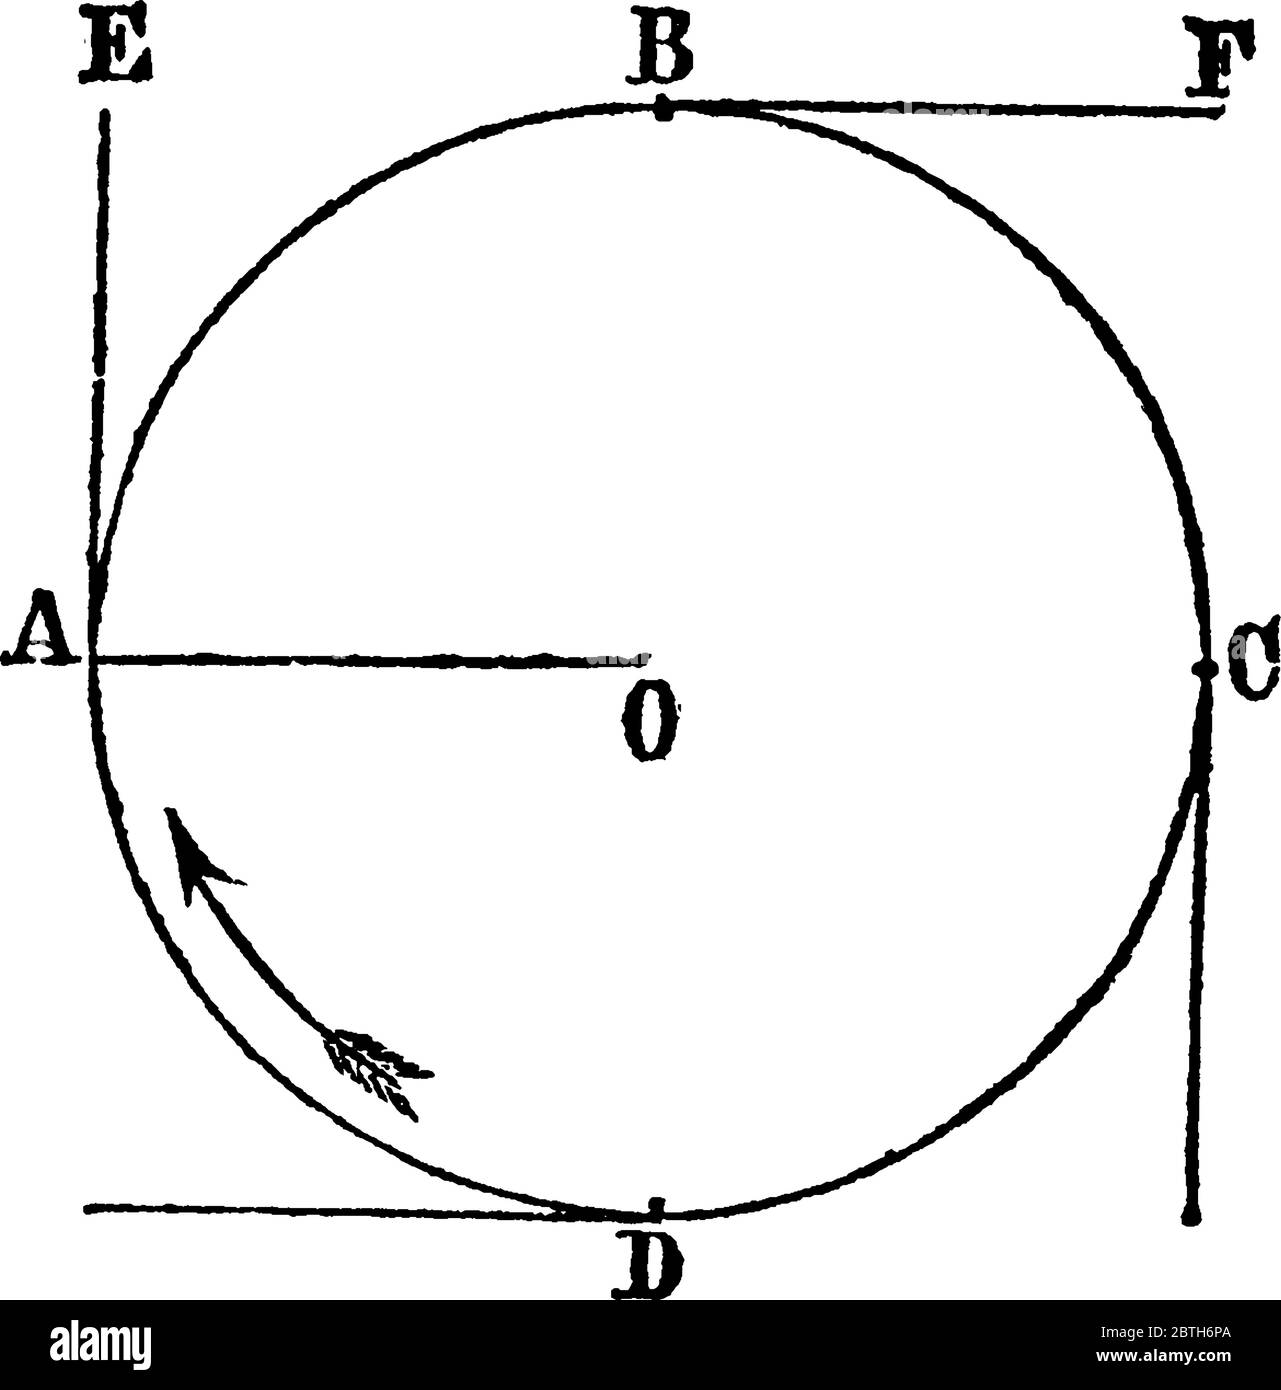 An experimental set-up to show the centrifugal force, the instant one of the strings is let go, the centrifugal force carries off the stone in a tange Stock Vector